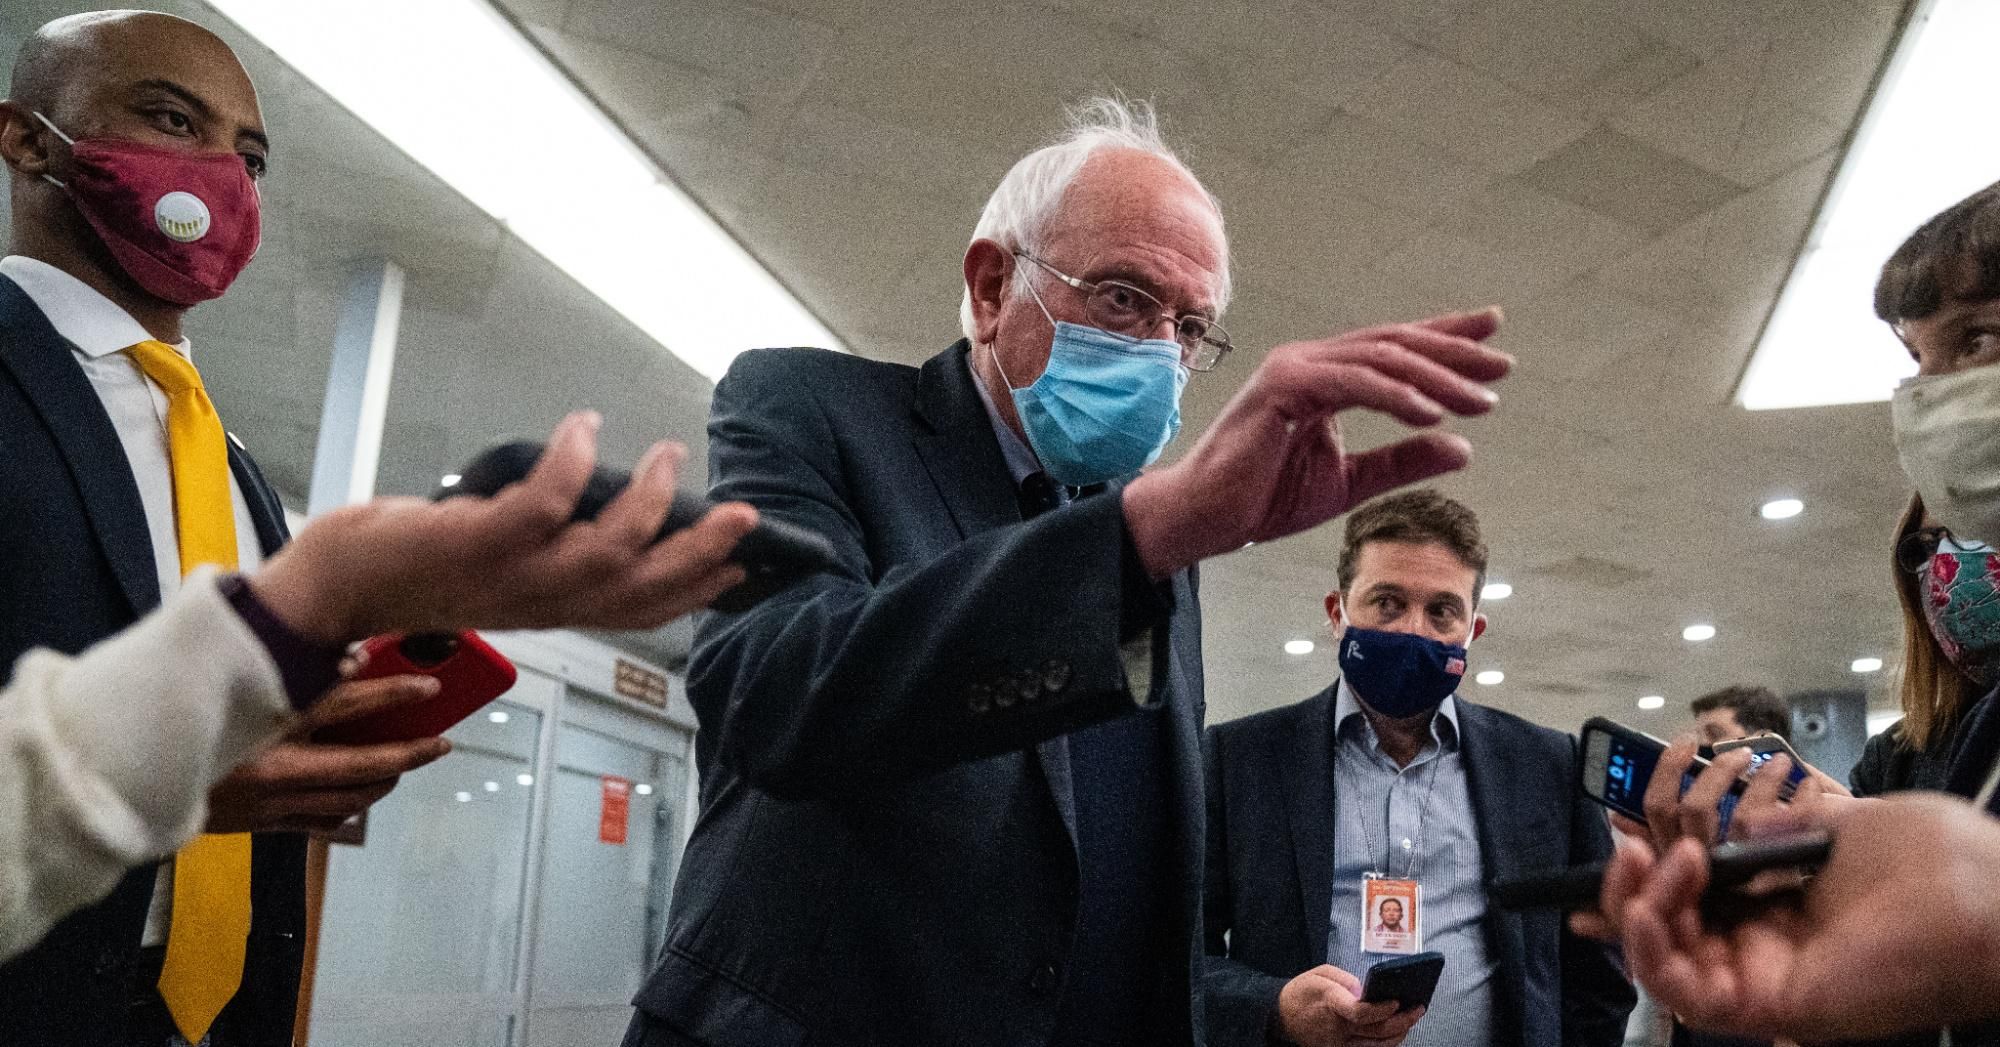 Sen. Bernie Sanders (I-Vt.) speaks with reporters in the Senate Subway on Tuesday, April 13, 2021 in Washington, D.C.